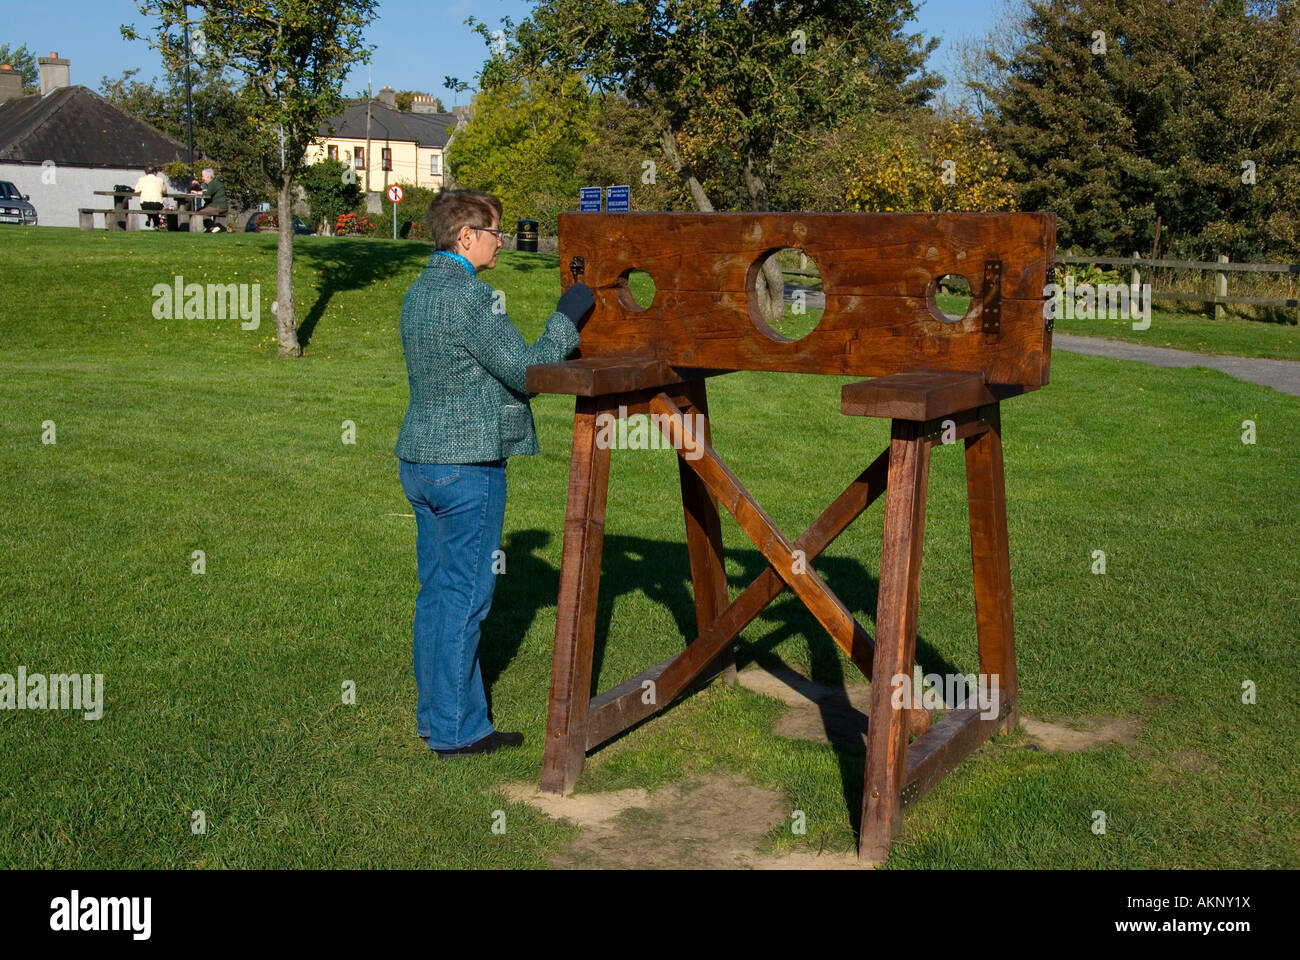 A modern version of mediaeval stocks on display at Trim castle county Meath Ireland Stock Photo